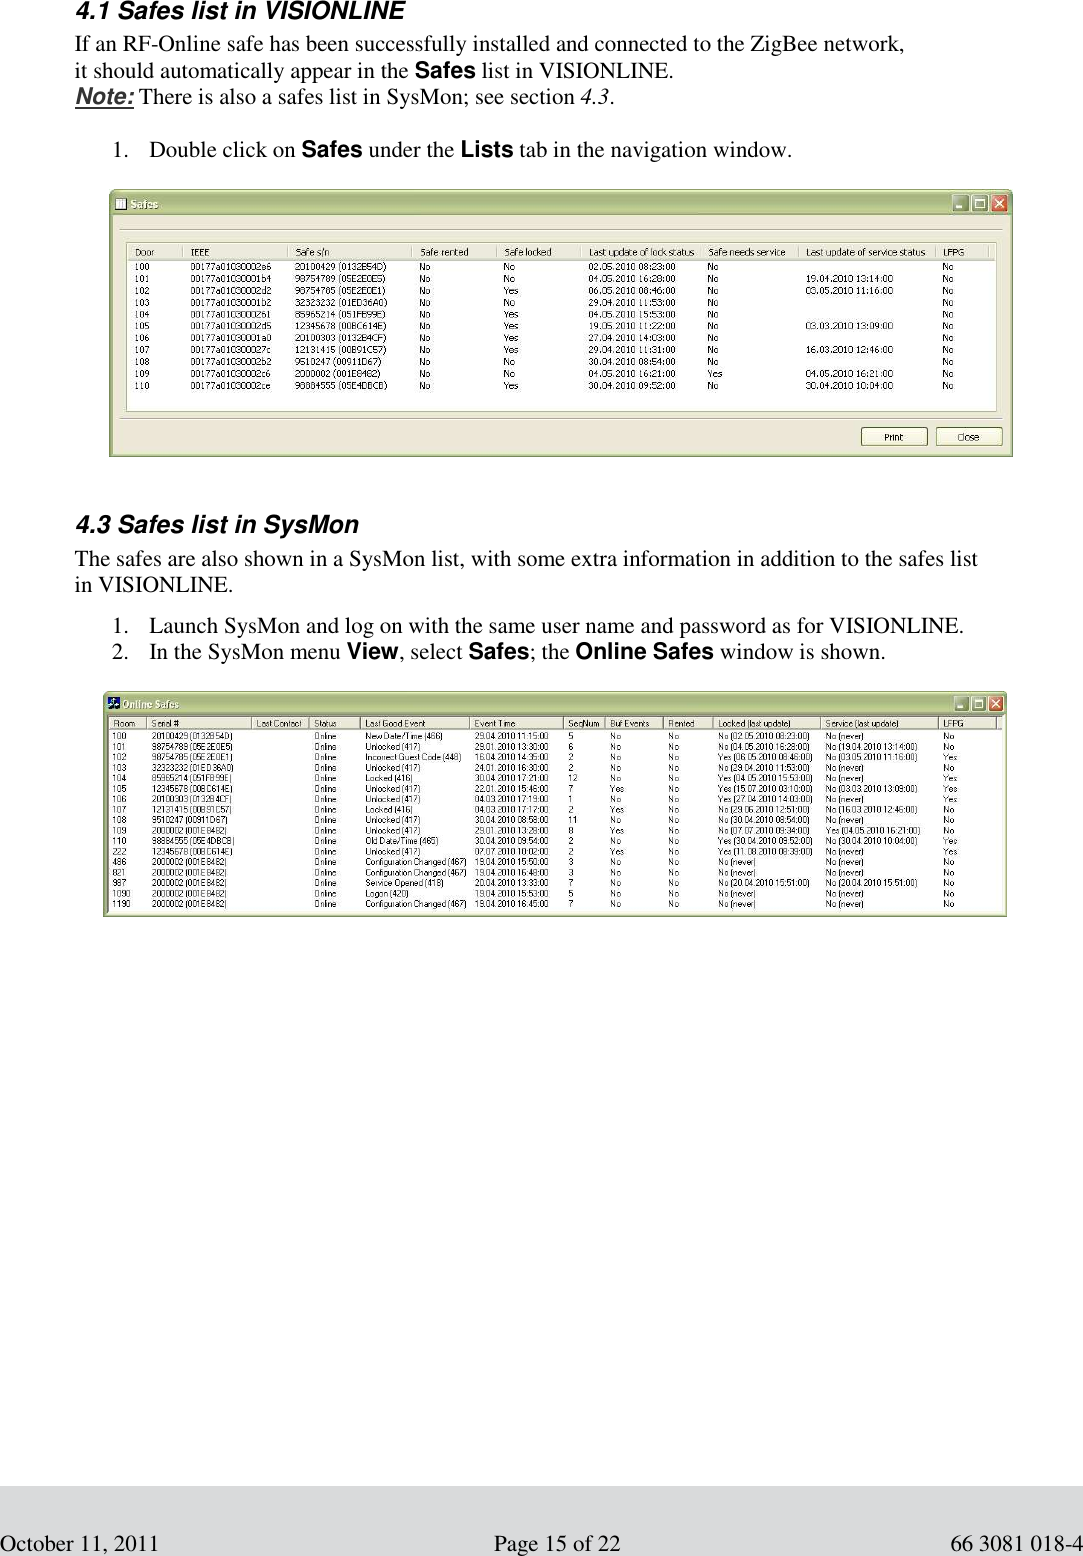         October 11, 2011                                                     Page 15 of 22                                             66 3081 018-4 4.1 Safes list in VISIONLINE If an RF-Online safe has been successfully installed and connected to the ZigBee network,  it should automatically appear in the Safes list in VISIONLINE. Note: There is also a safes list in SysMon; see section 4.3.   1. Double click on Safes under the Lists tab in the navigation window.             4.3 Safes list in SysMon The safes are also shown in a SysMon list, with some extra information in addition to the safes list  in VISIONLINE.   1. Launch SysMon and log on with the same user name and password as for VISIONLINE. 2. In the SysMon menu View, select Safes; the Online Safes window is shown.          